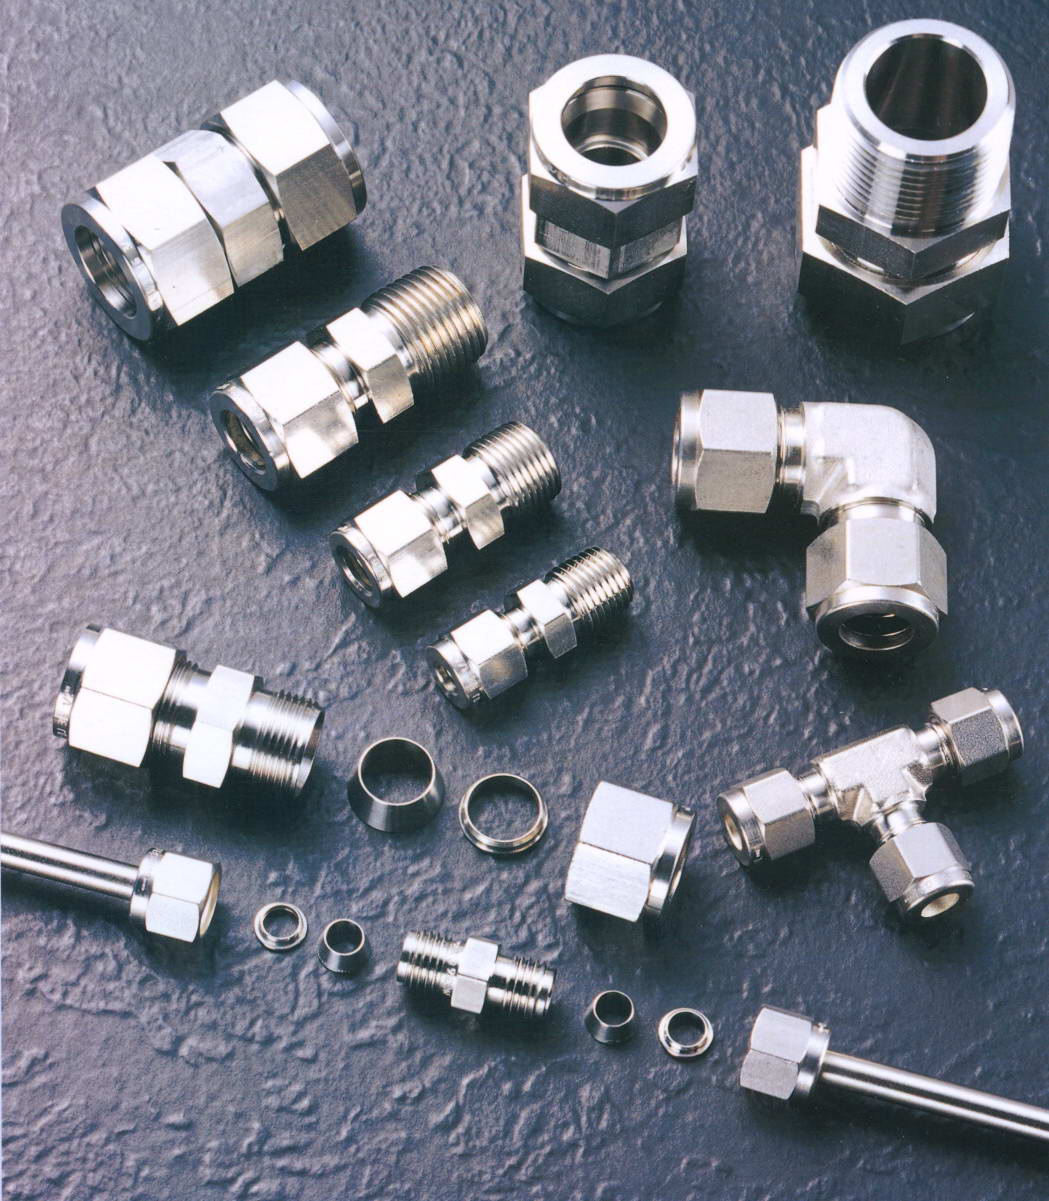 Stainless Steel Tube Fittings, High Purity Tube Fittings,SWG Instrumentation Fittings